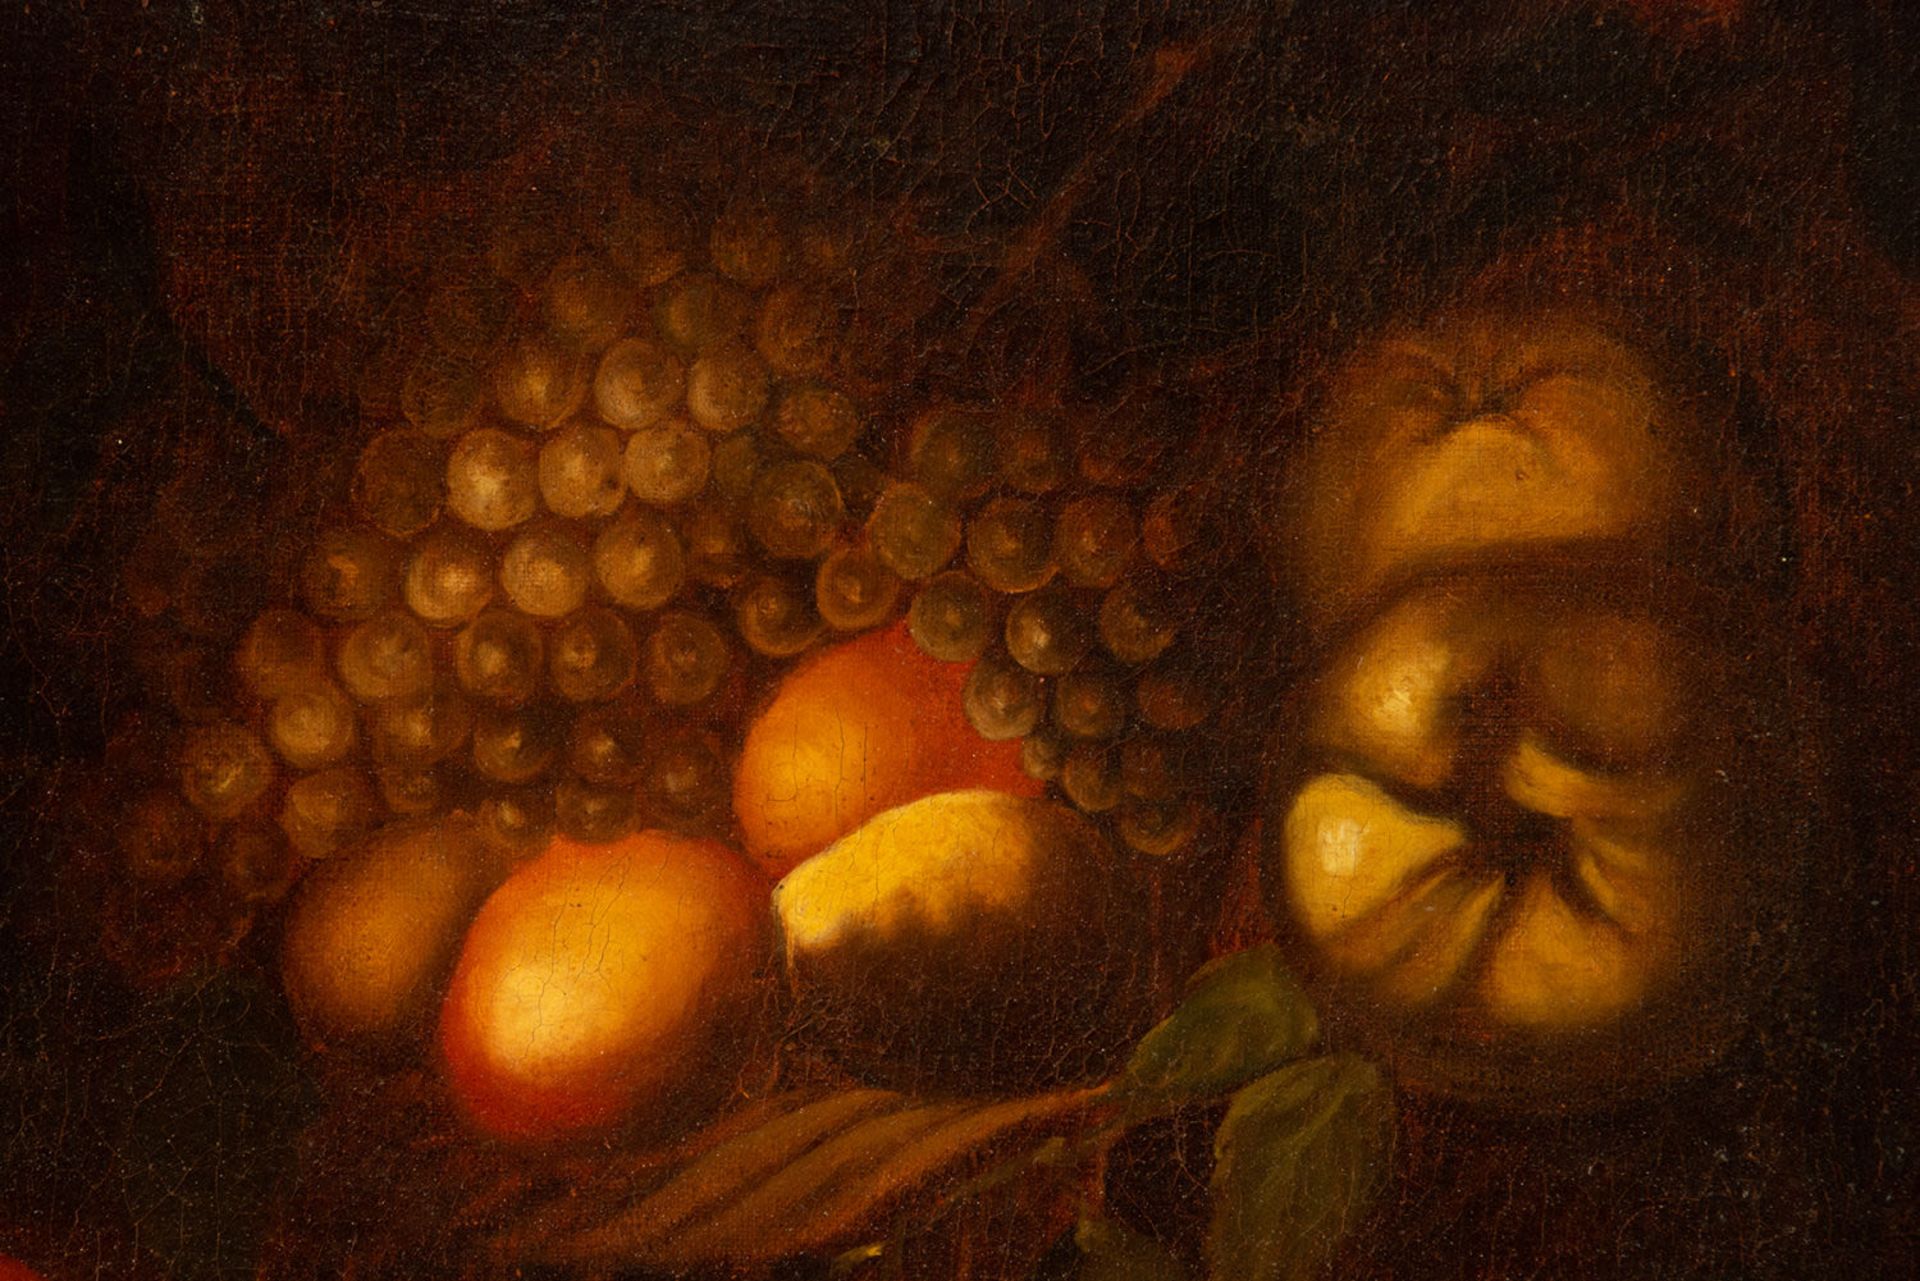 Still Life with Fruit and Lobster, 17th century Dutch school - Image 5 of 7